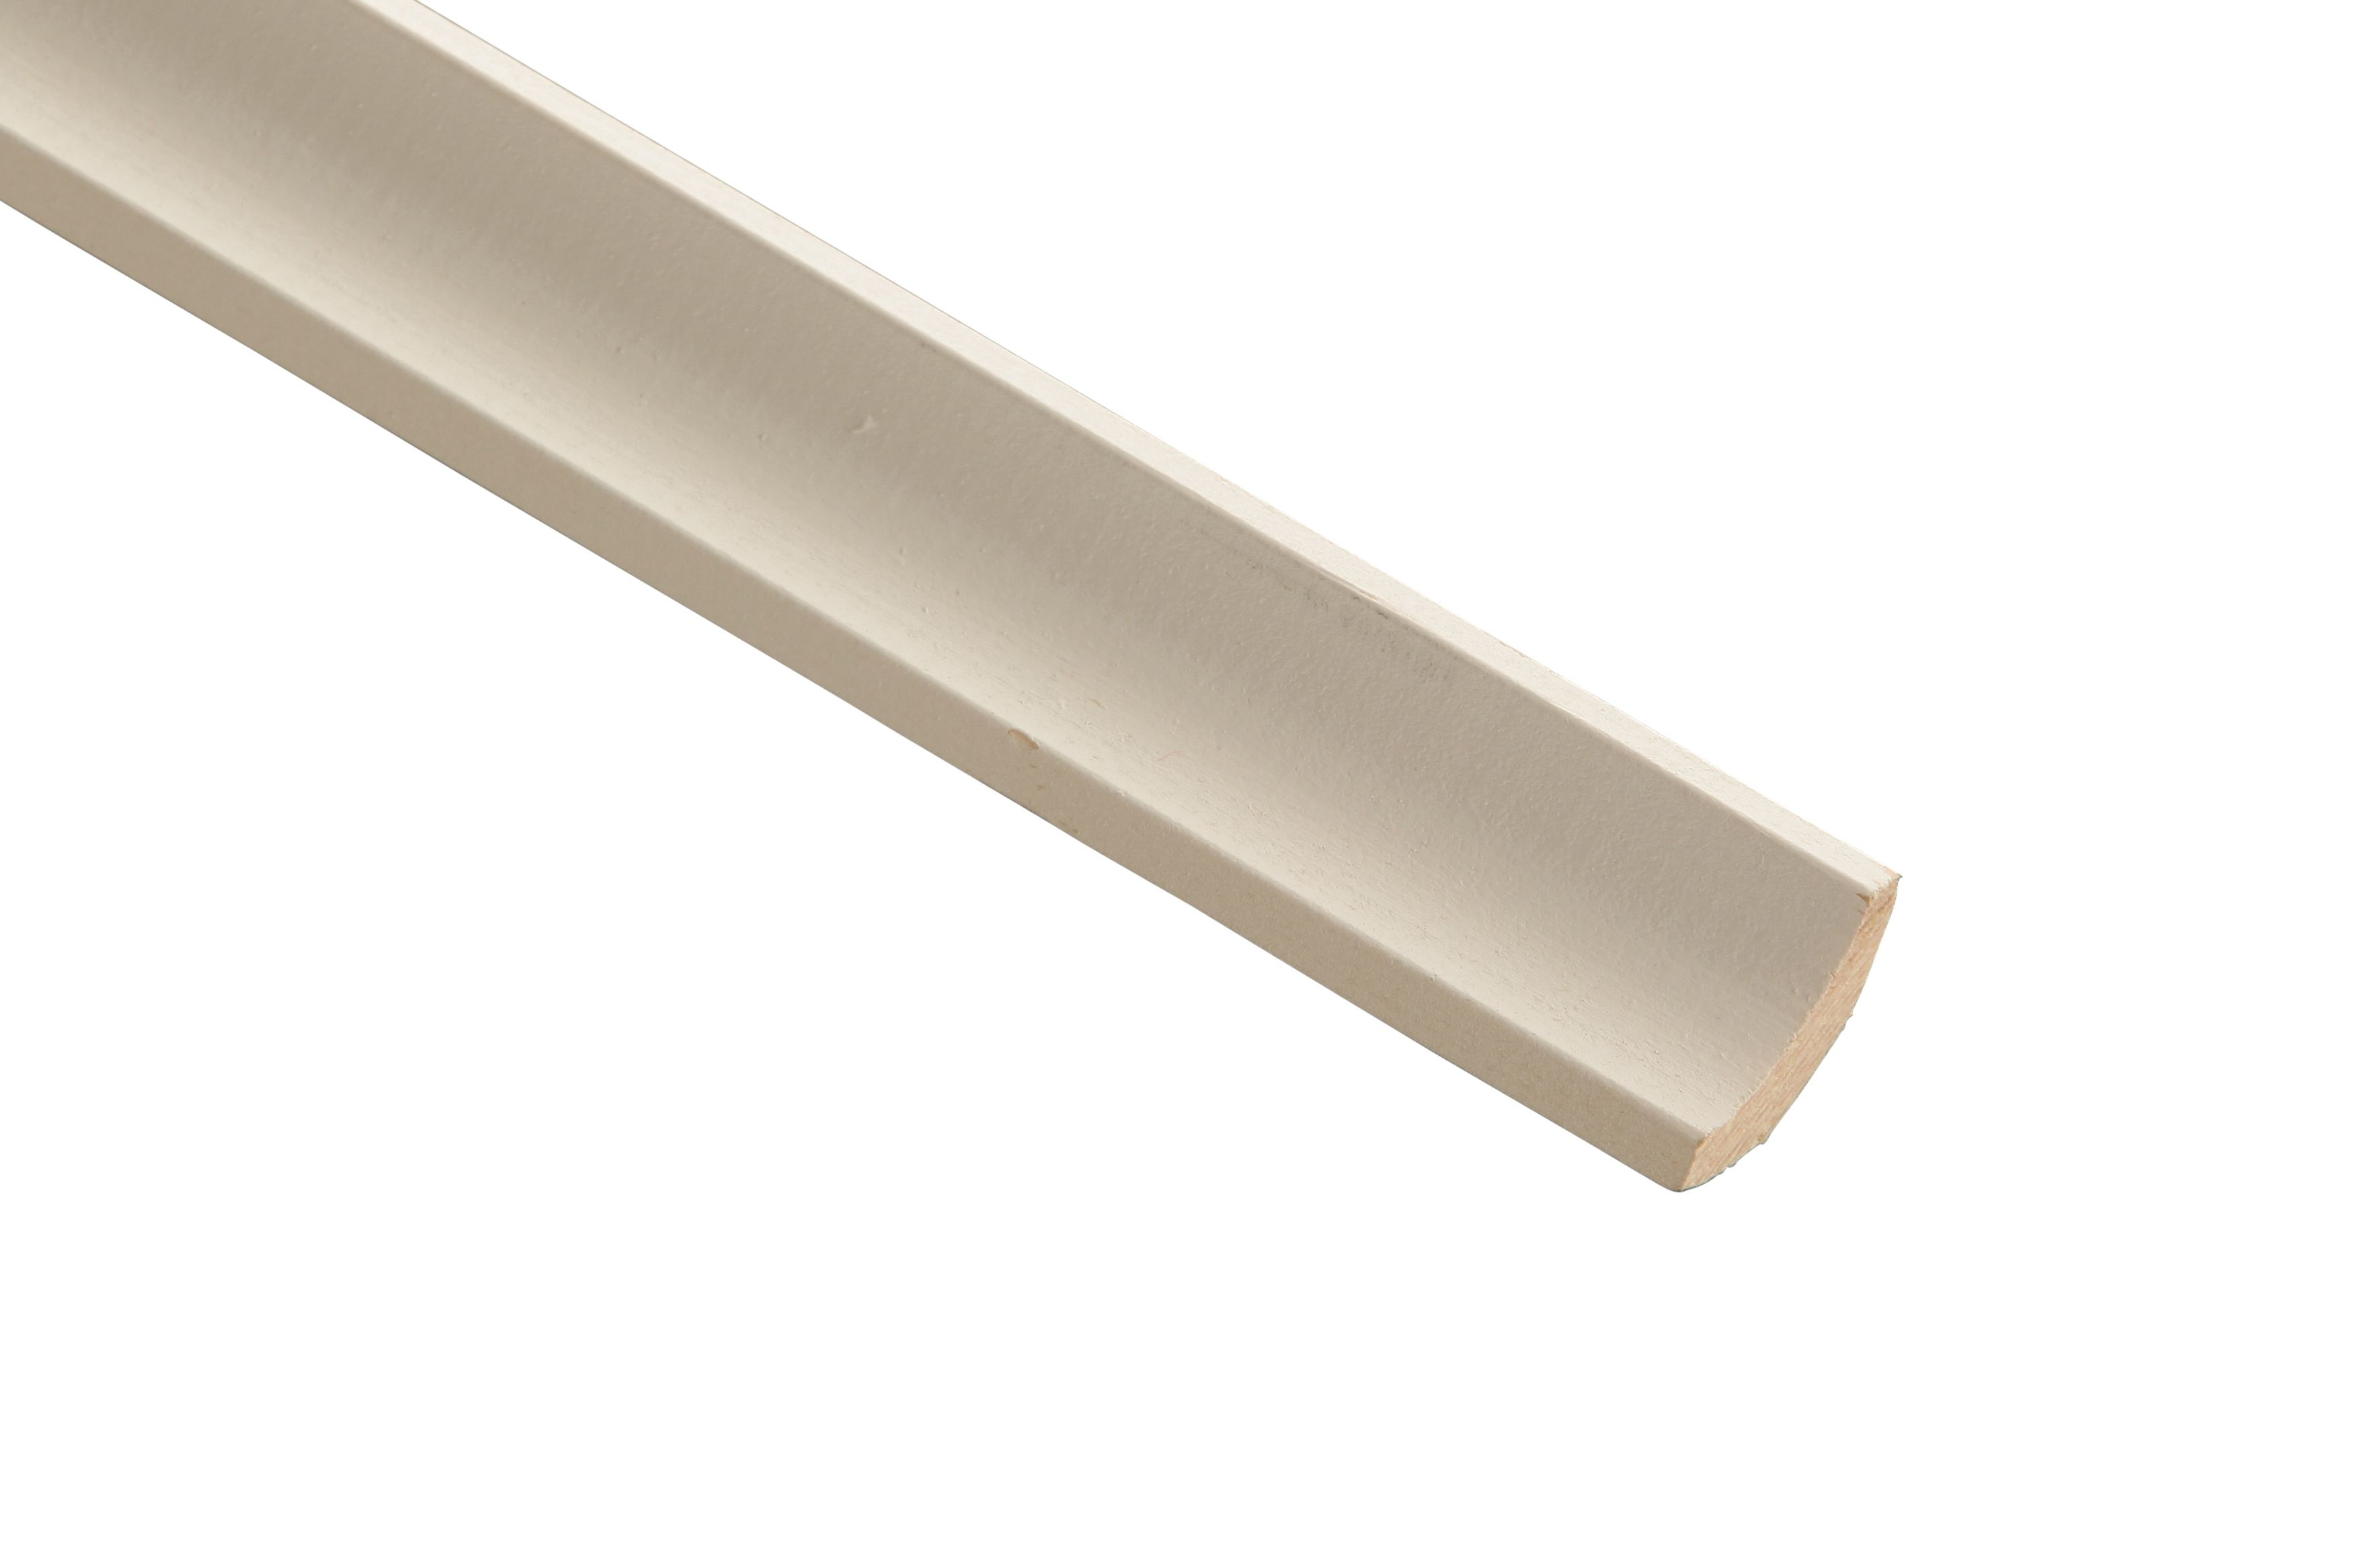 Image of Wickes Primed Coving Moulding - 20 x 20 x 2400mm